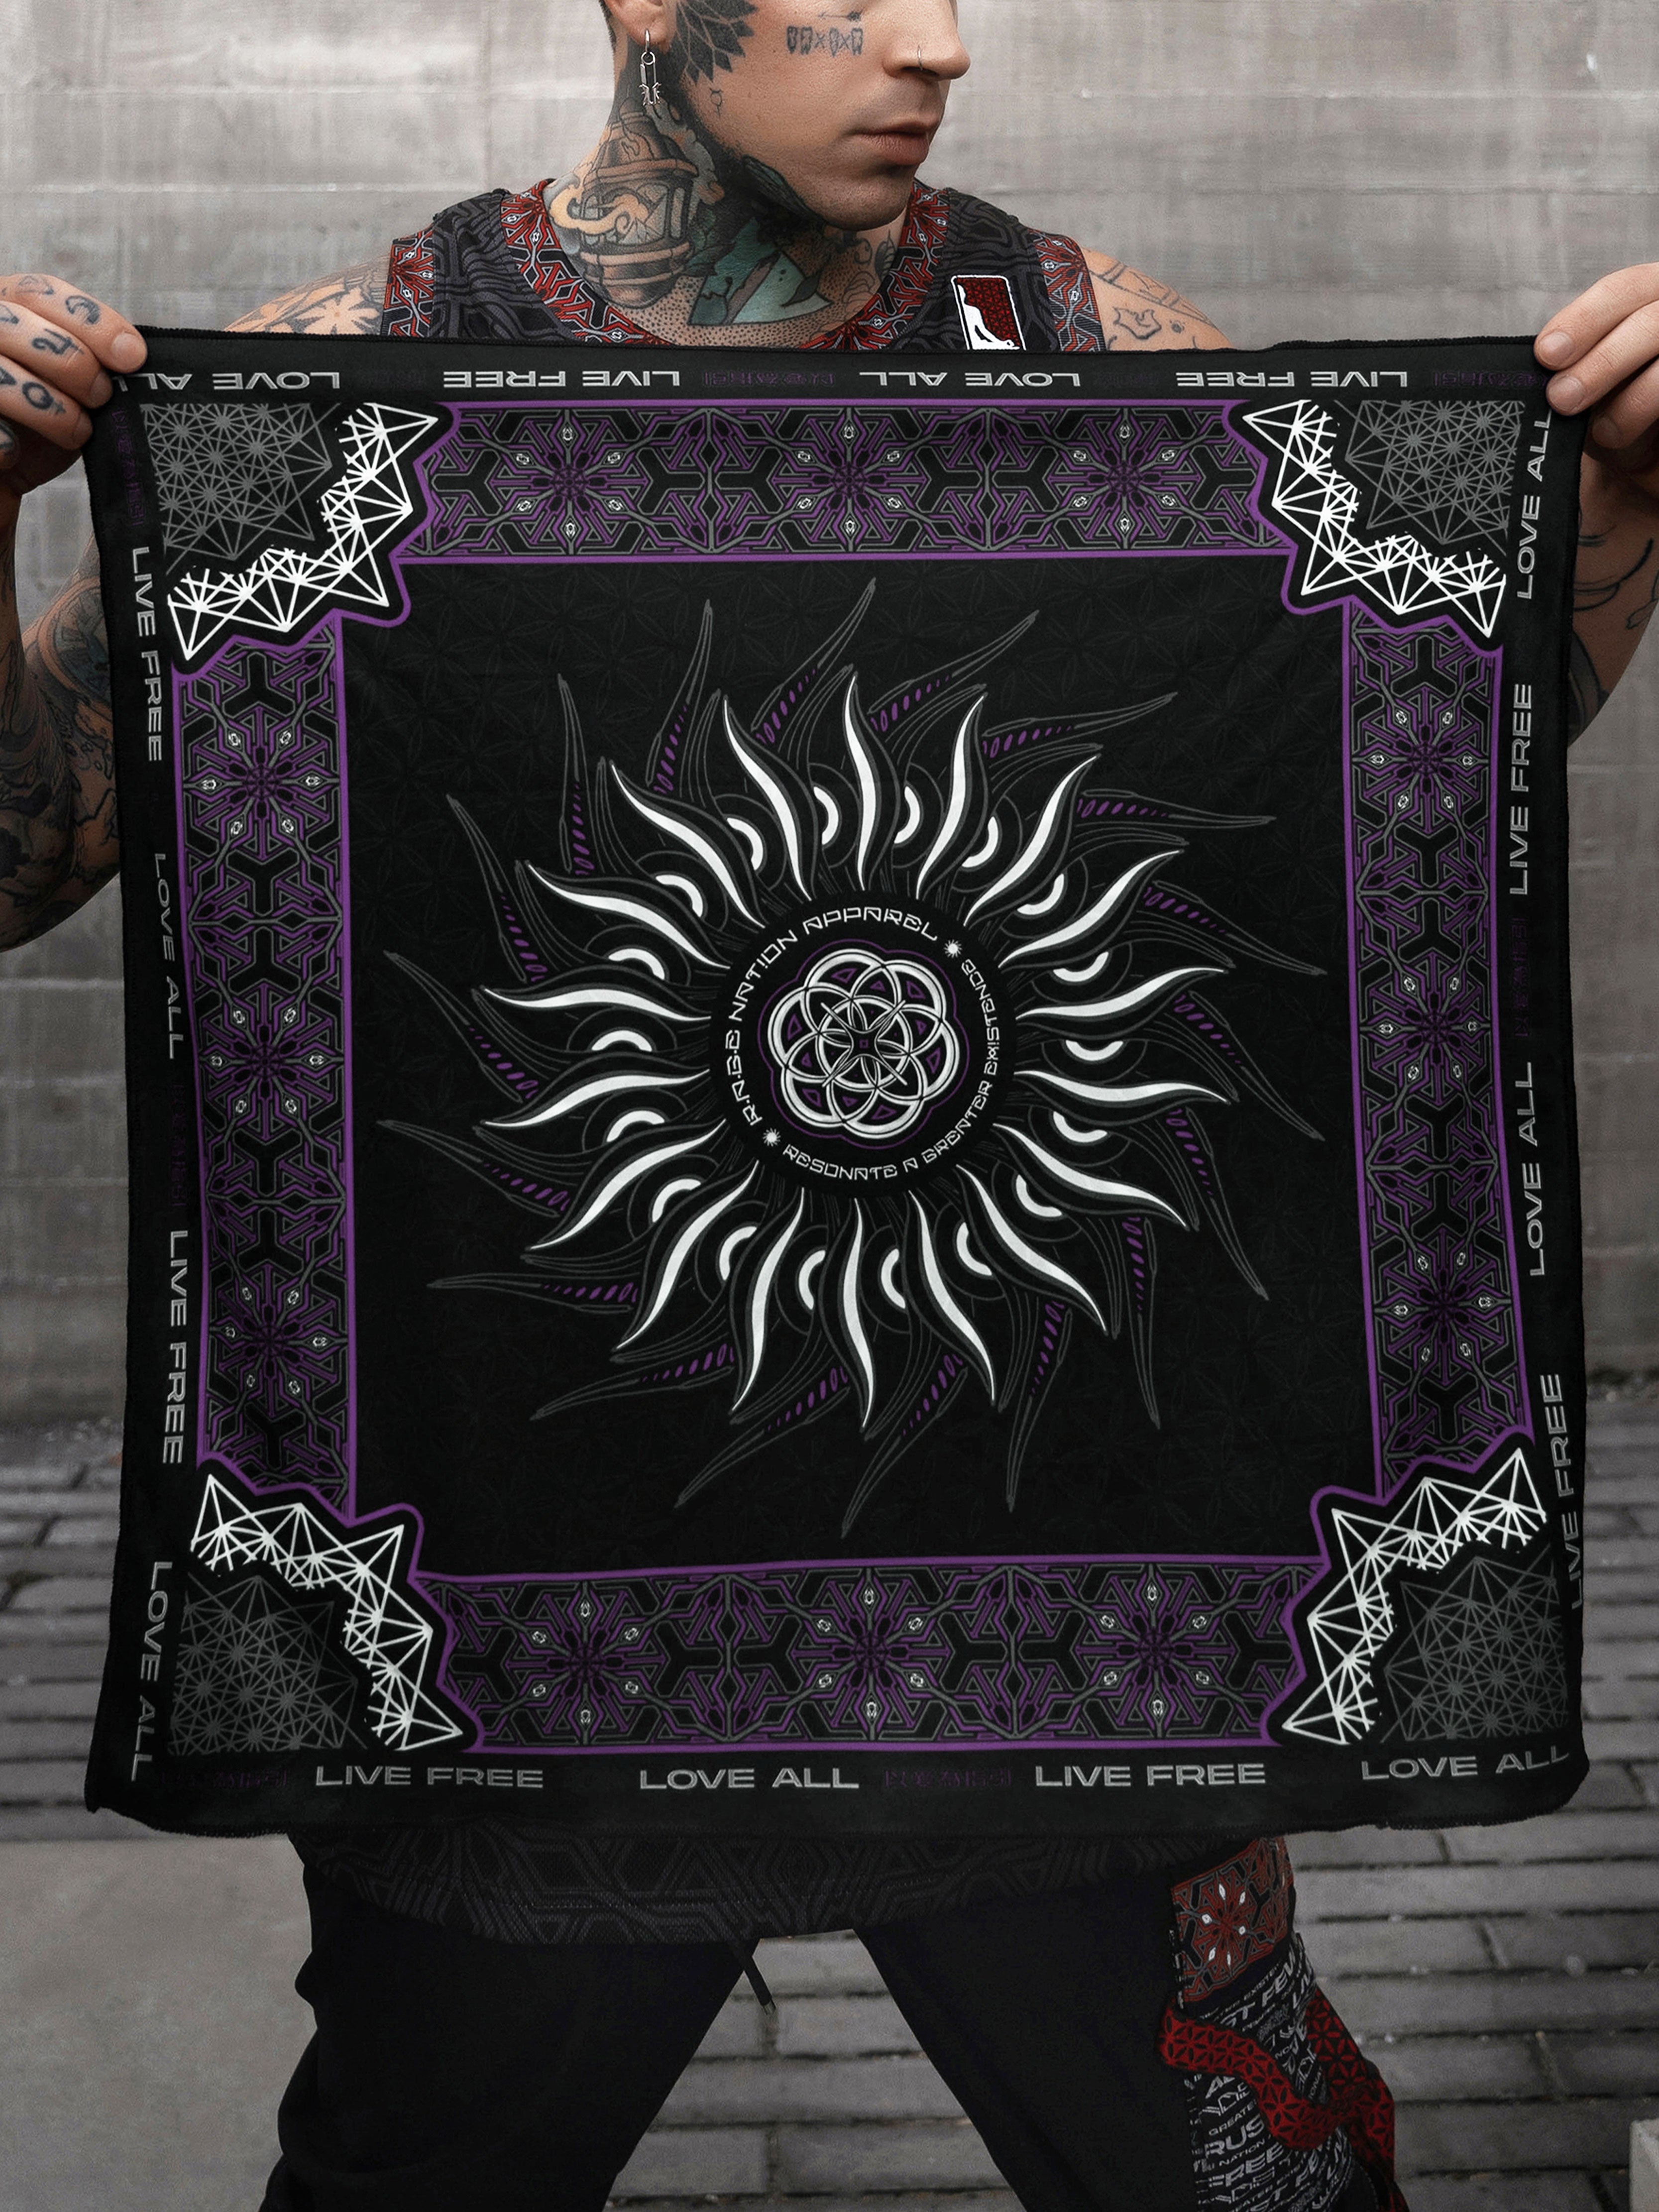 PRE-ORDER ✦ PROTECTED BY INTENT ✦ Lavender Double-sided Bandana Coming Soon 